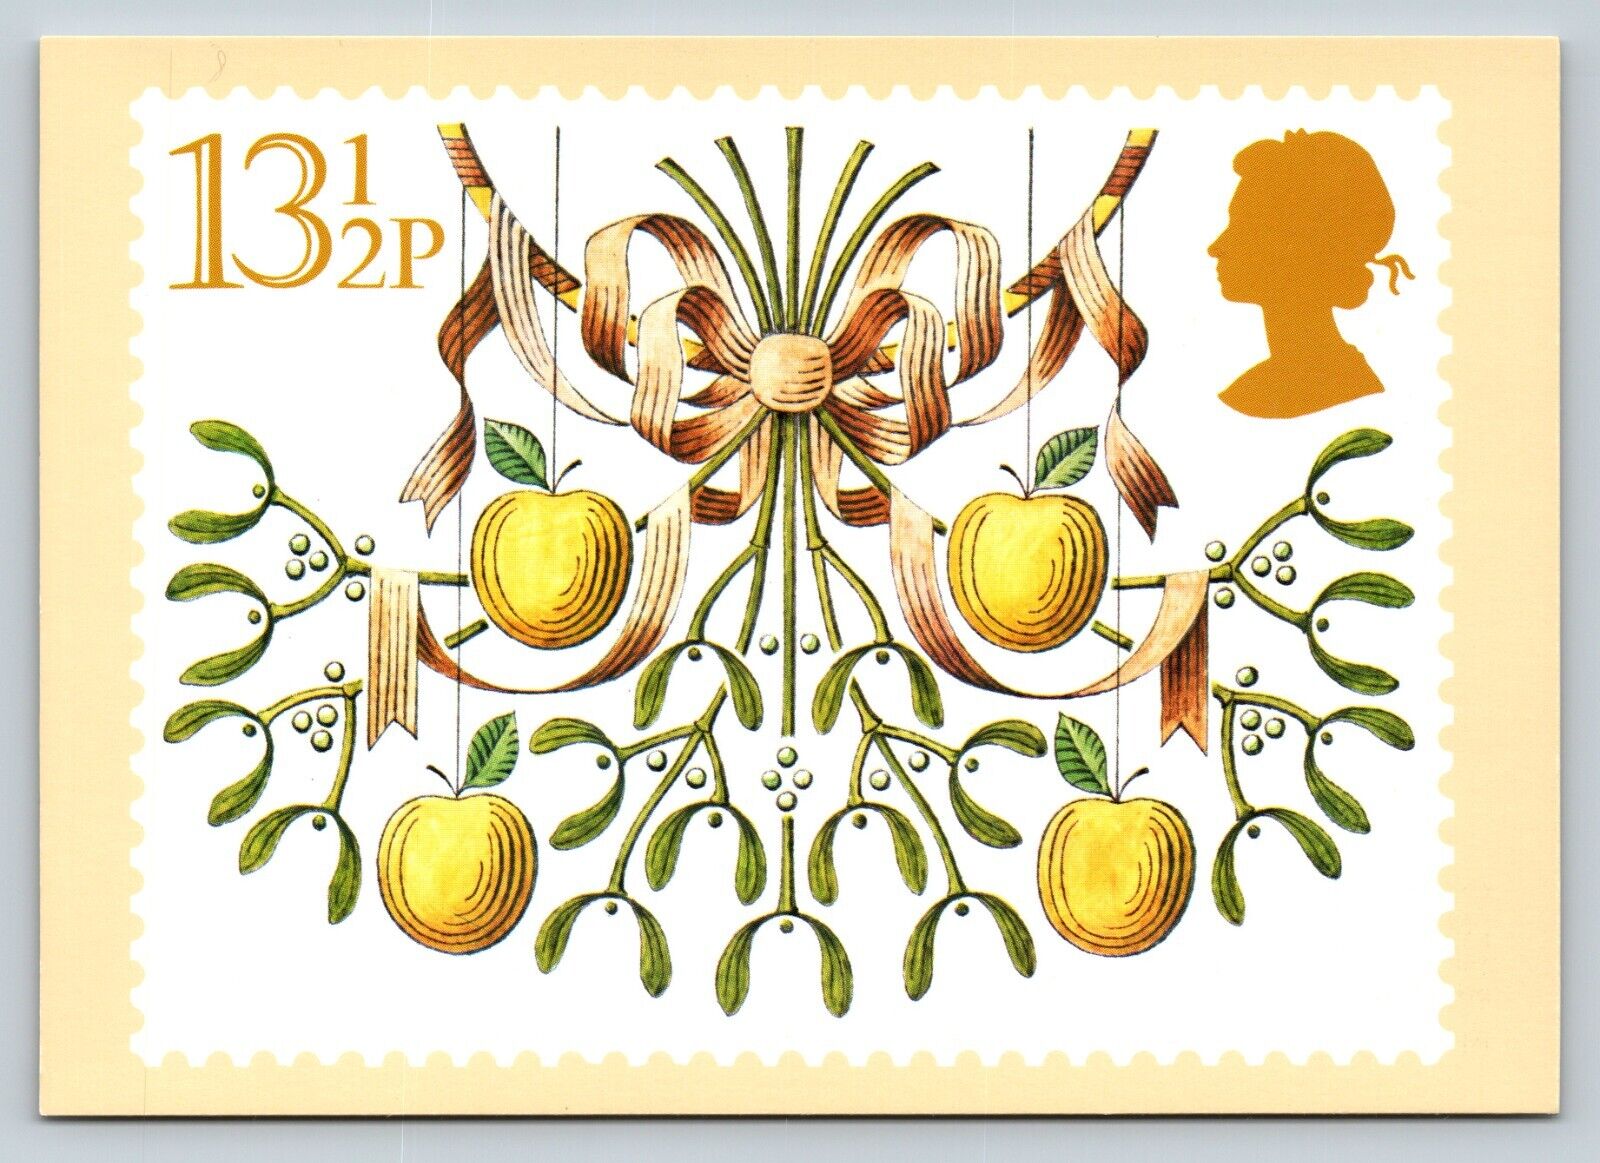 c1980 Postcard Reproduced From England Stamp Design 13 1/2p 6x4\